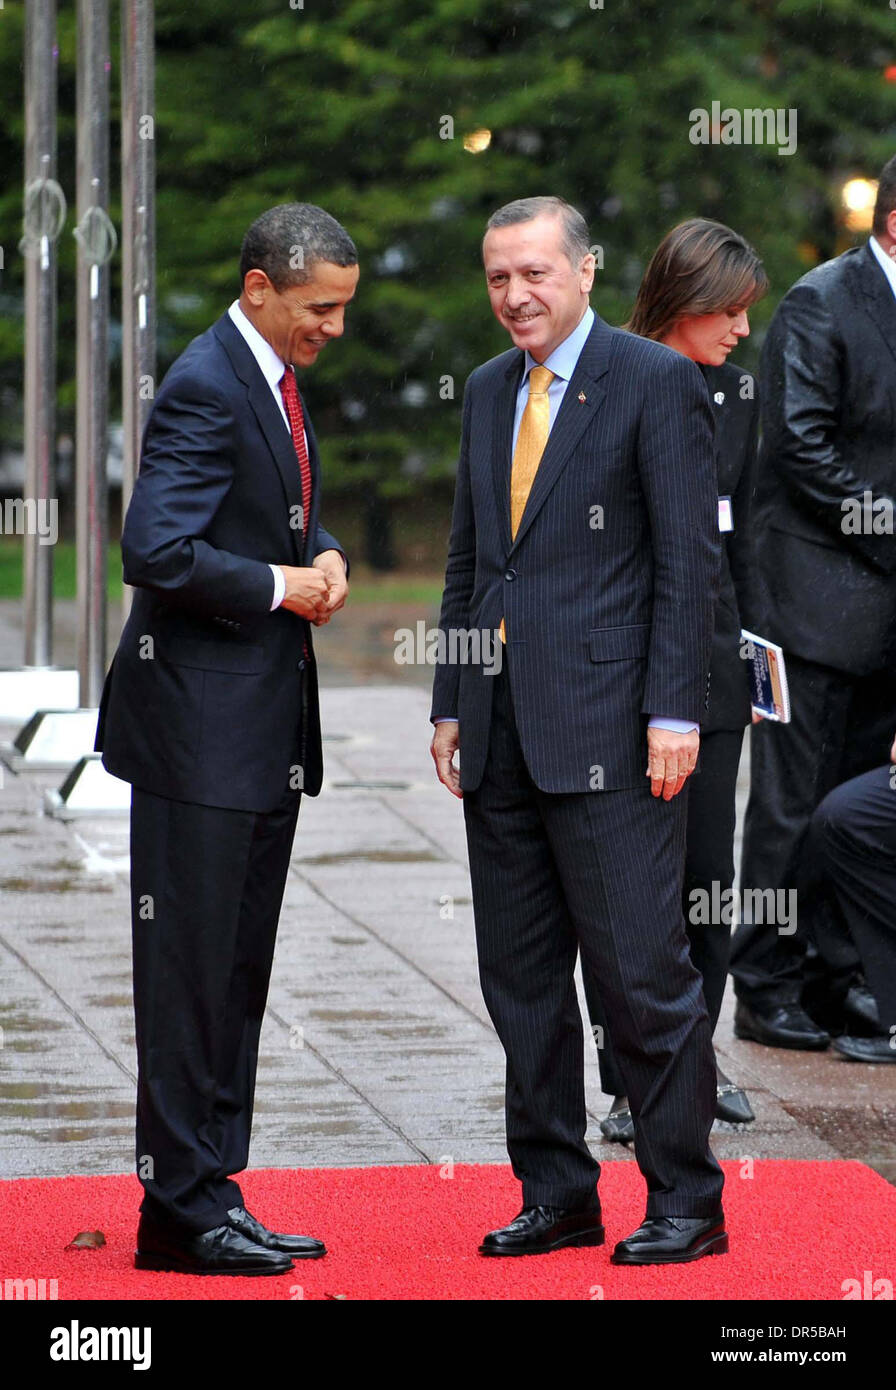 Apr 06, 2009 - Ankara, Turkey - U.S. President BARACK OBAMA (L) is welcomed by Turkish Prime Minister TAYYIP ERDOGAN before their meeting in Ankara, April 6, 2009. Obama's visit on the last leg of an eight-day trip that marks his debut as president on the world stage, is a recognition of the secular but predominantly Muslim country's growing clout and Washington's desire for its he Stock Photo